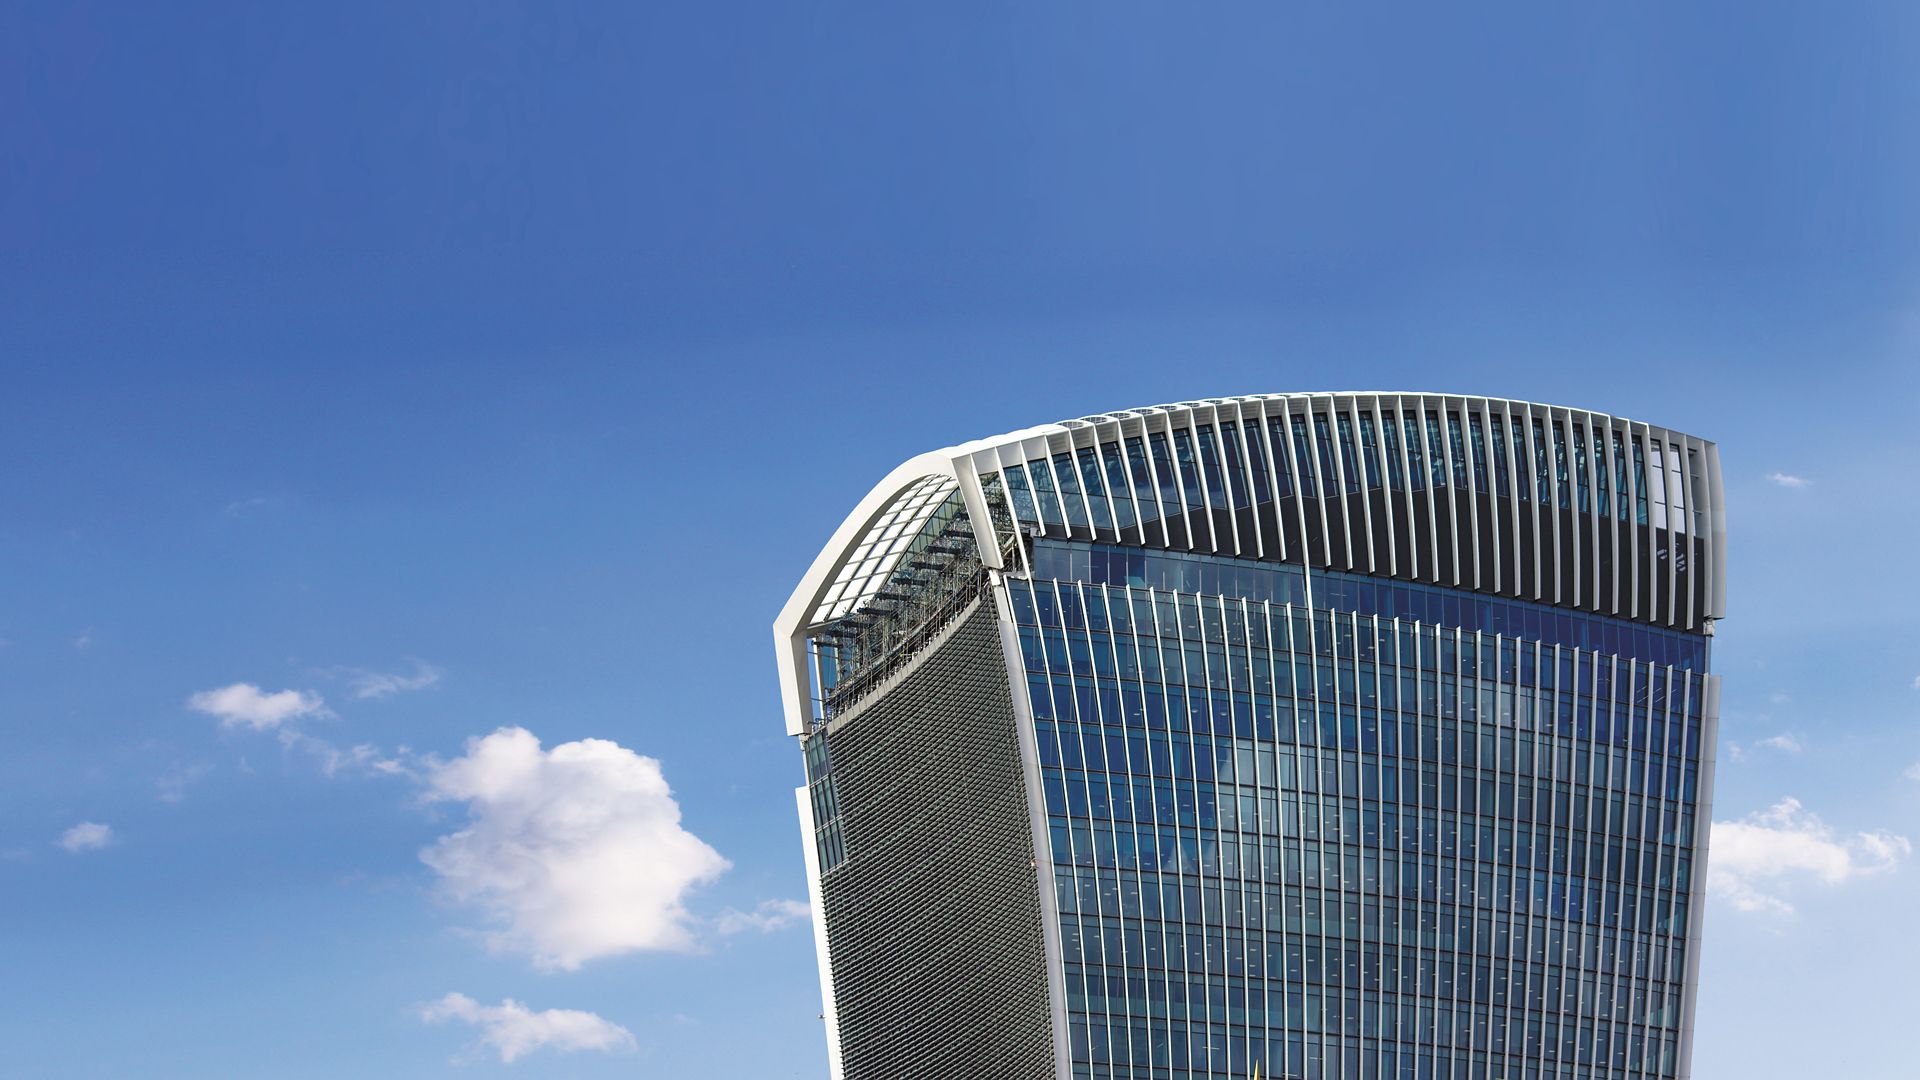 Reference of facade business walkie talkie 20 Fenchurch street london uk